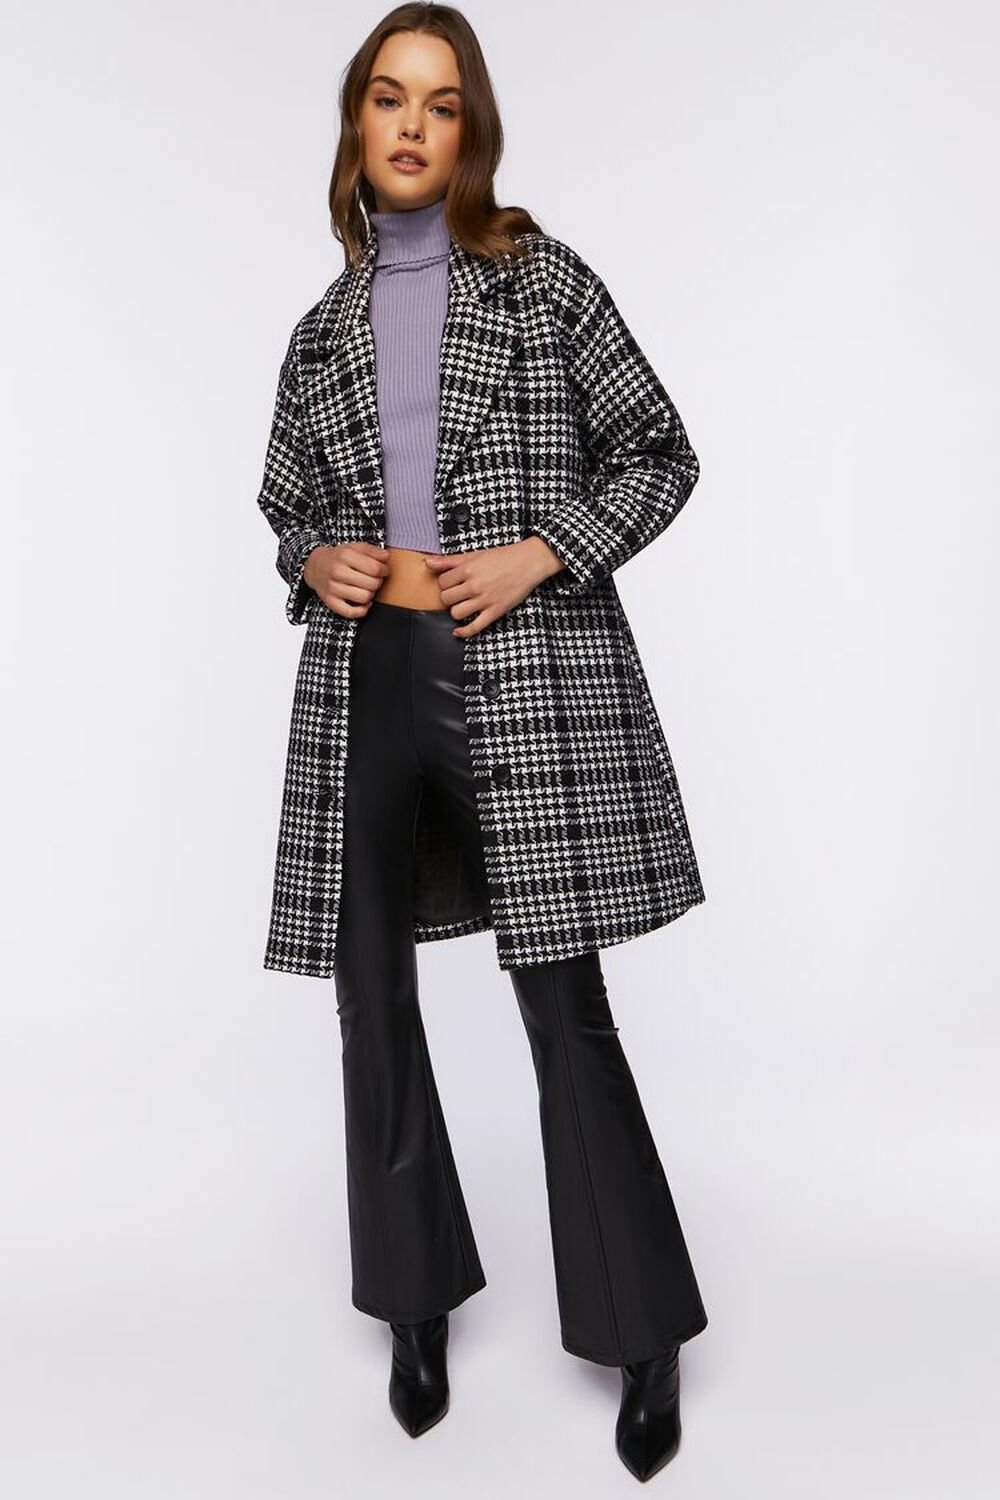 BLACK/WHITE Houndstooth Button-Front Coat, image 1